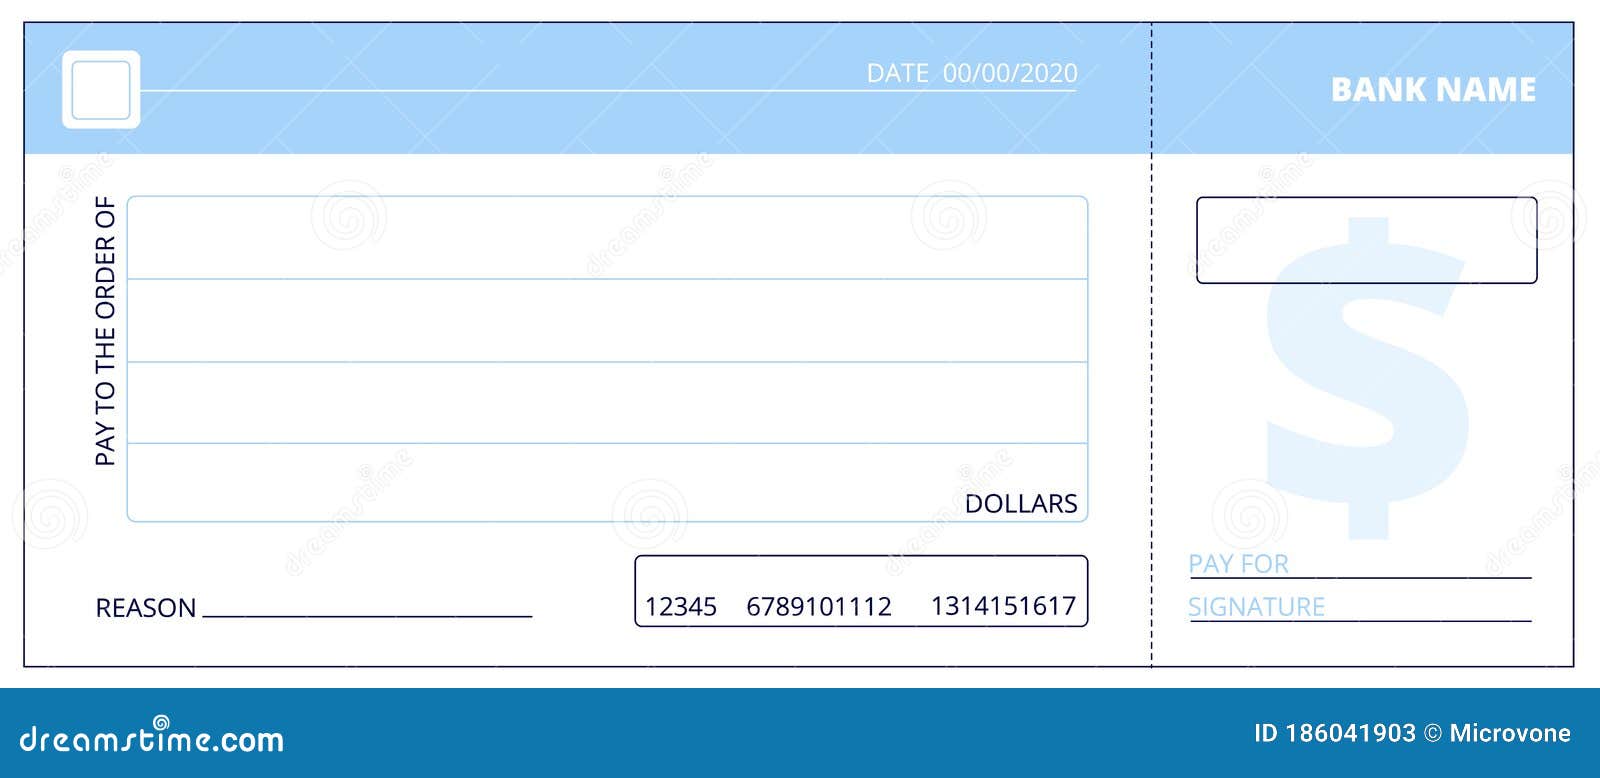 Blank Check Template. Business Cheque Book Design. Bank Checking Pertaining To Blank Money Order Template